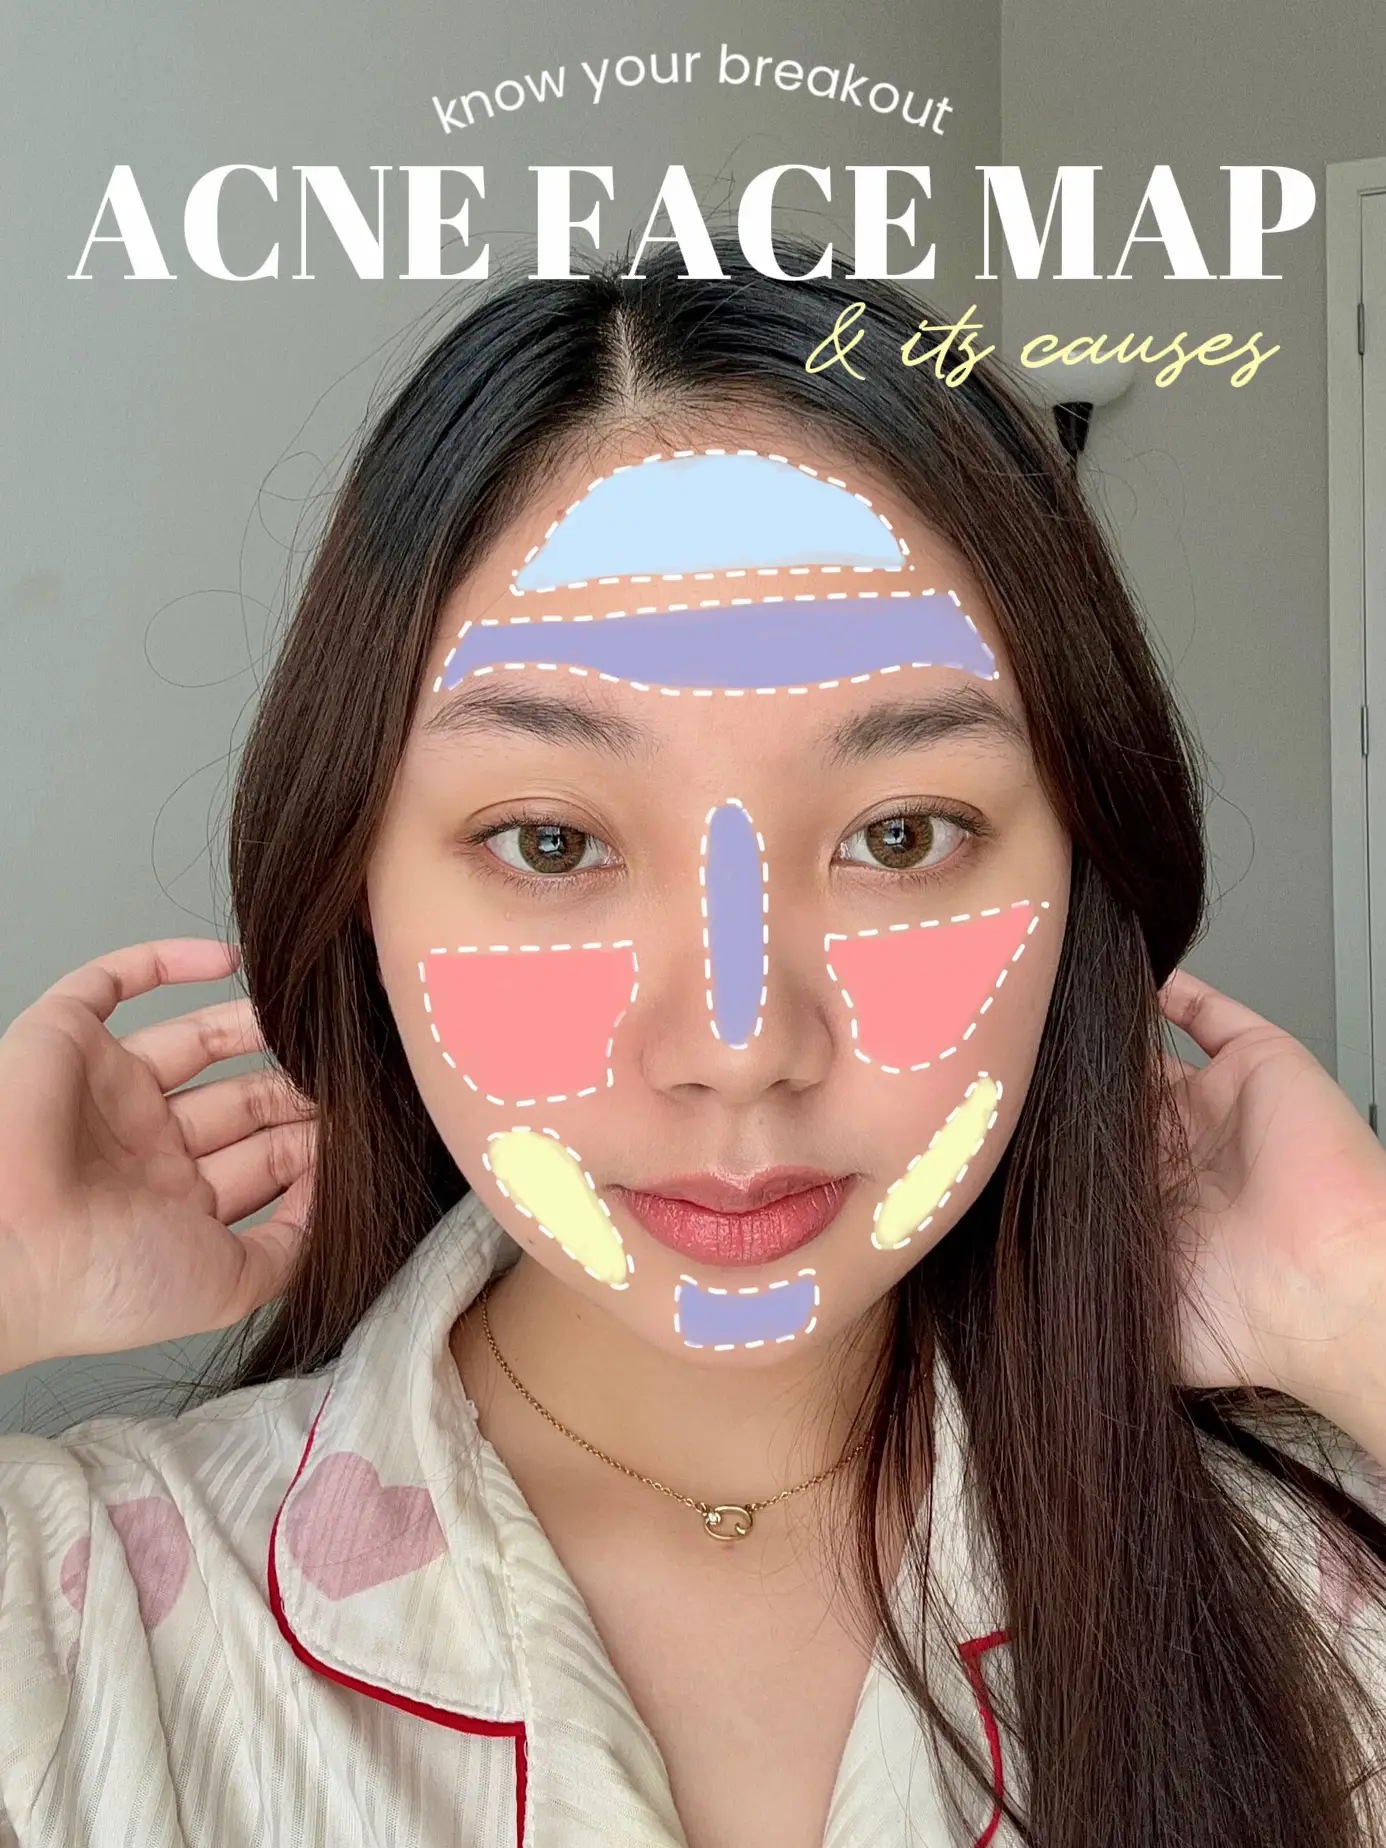 ACNE FACE MAP: Know your Breakouts & its Causes! 💯's images